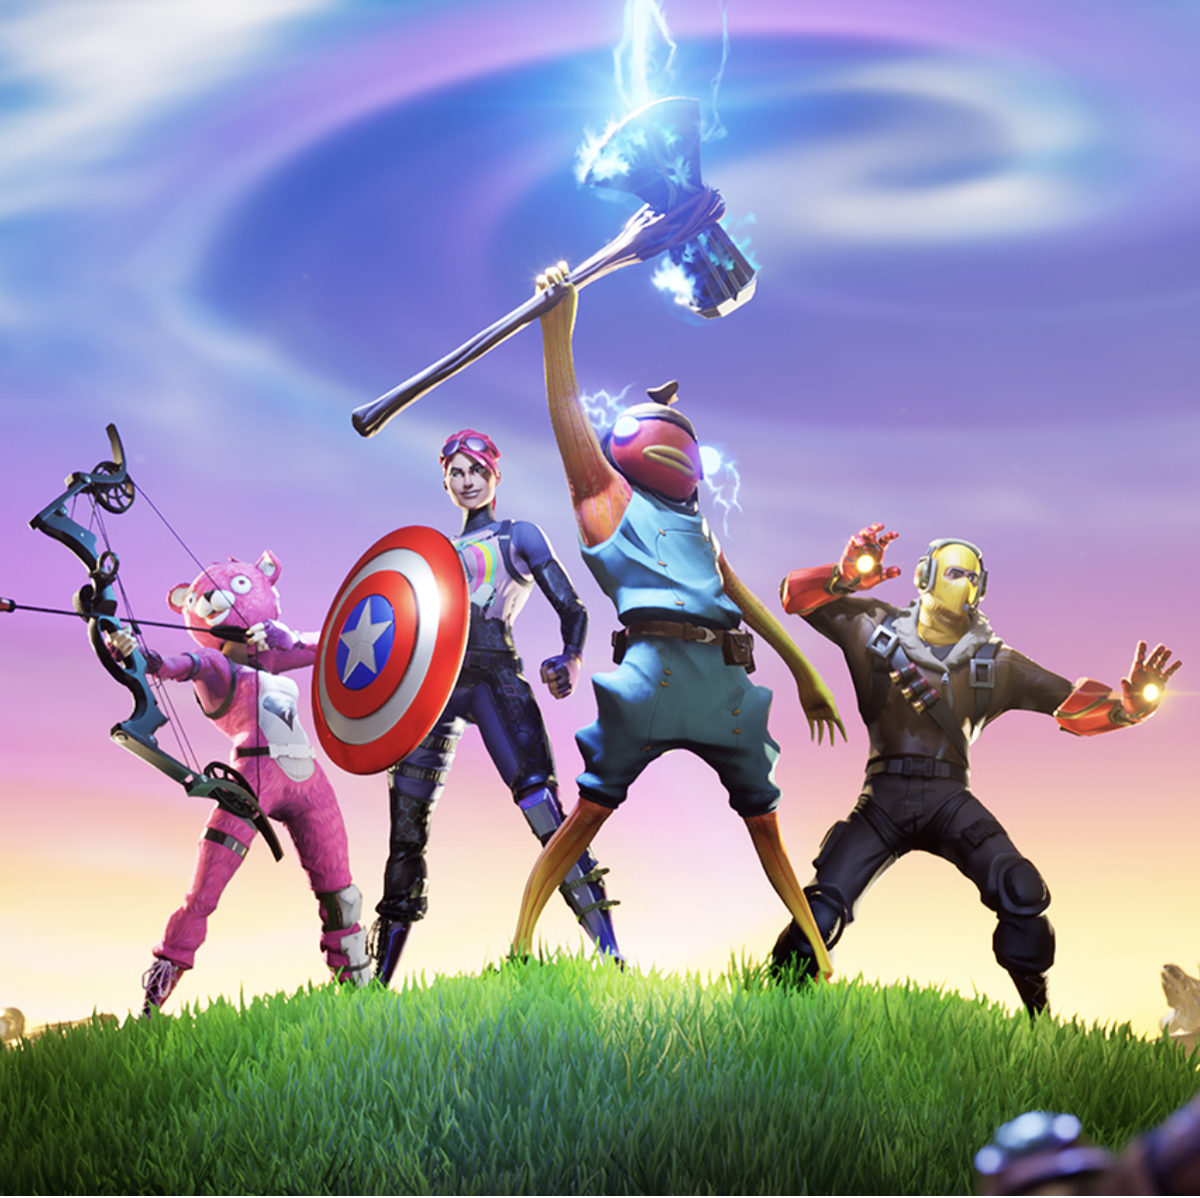 Fortnite Reveals New Avengers Collaboration with Thanos, Avenger Weapons,  and Marvel Skins